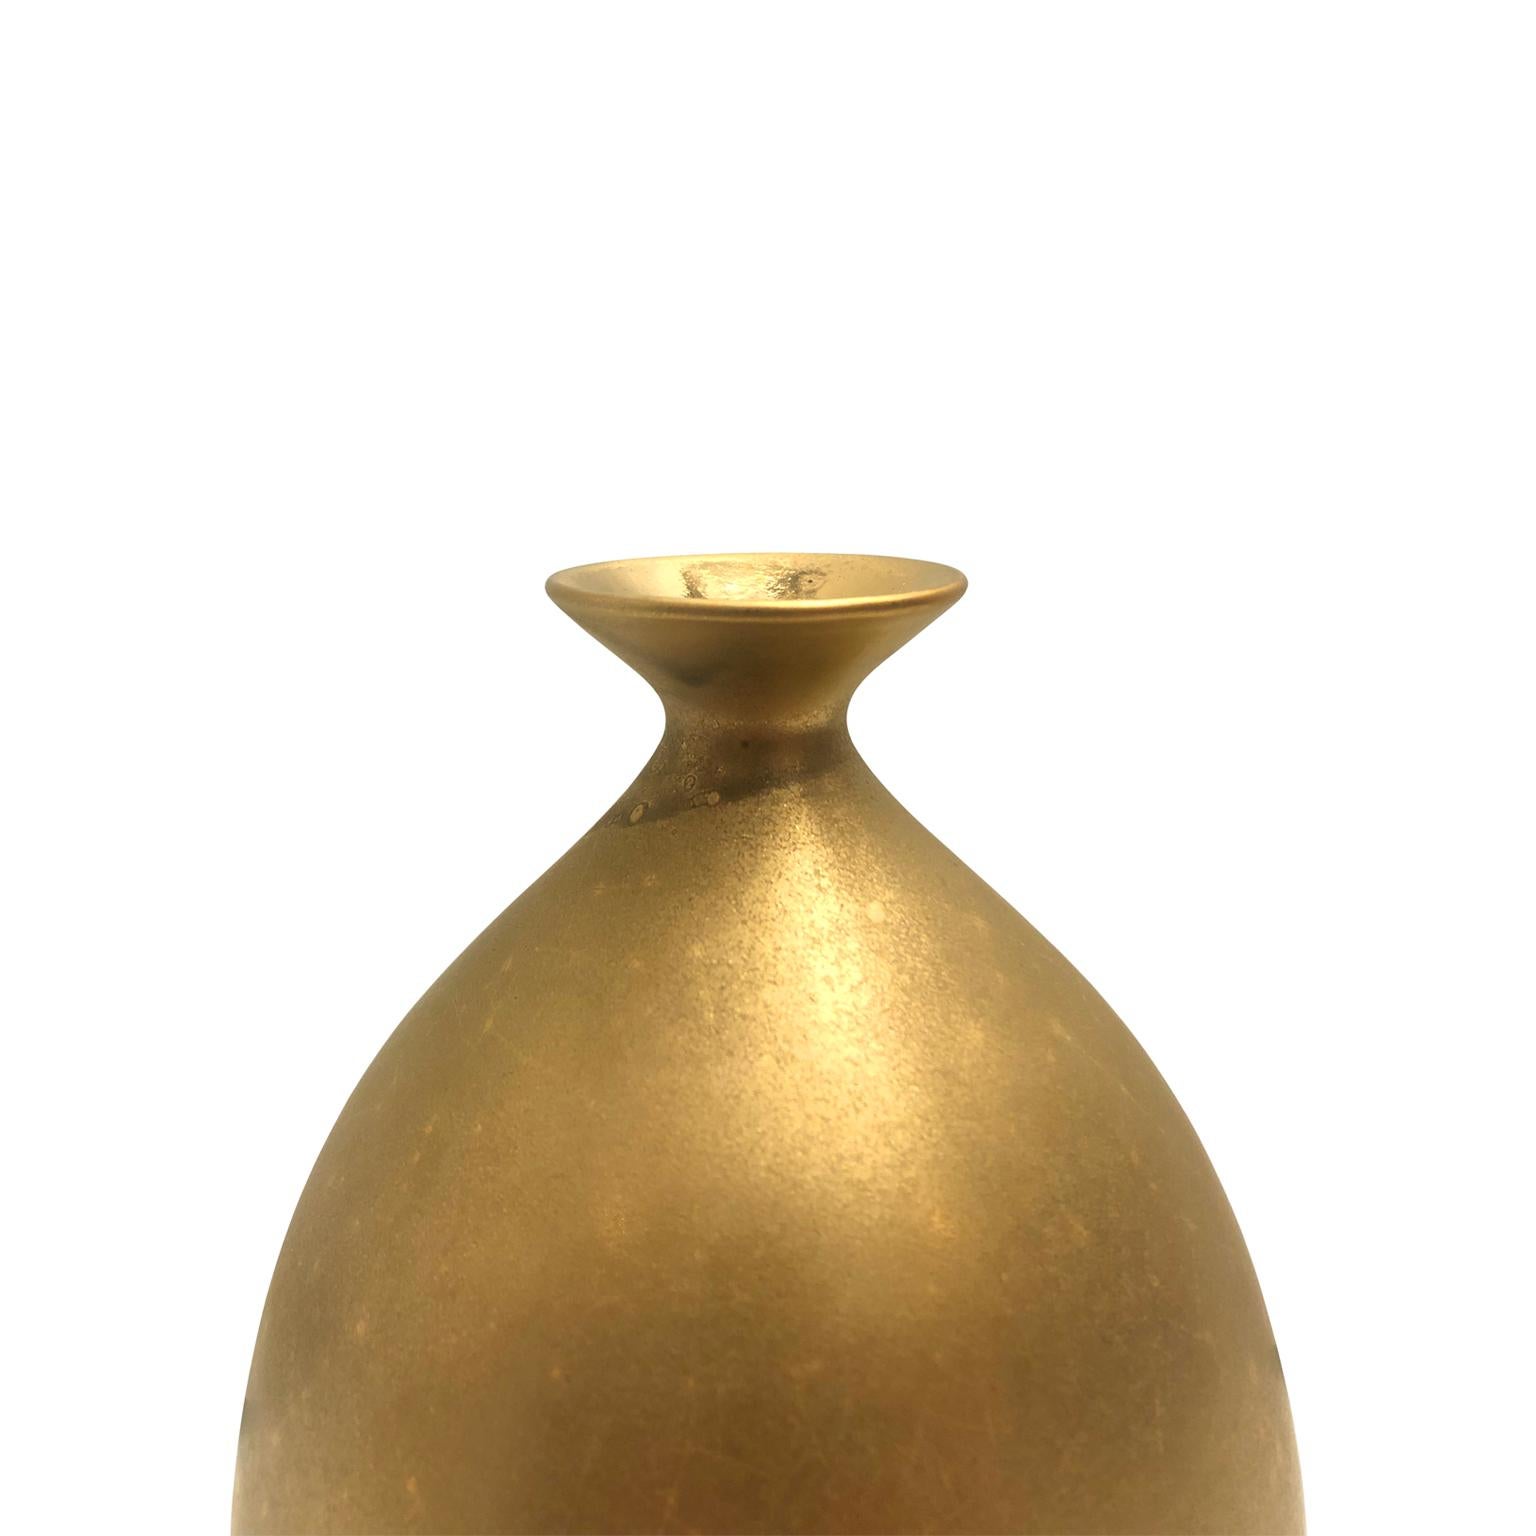 Small ceramic bottle vase with burnished gold lustre glaze by Sandi Fellman, 2019. 

Veteran photographer Sandi Fellman's ceramic vessels are an exploration of a new medium. The forms, palettes, and sensuality of her photos can be found within